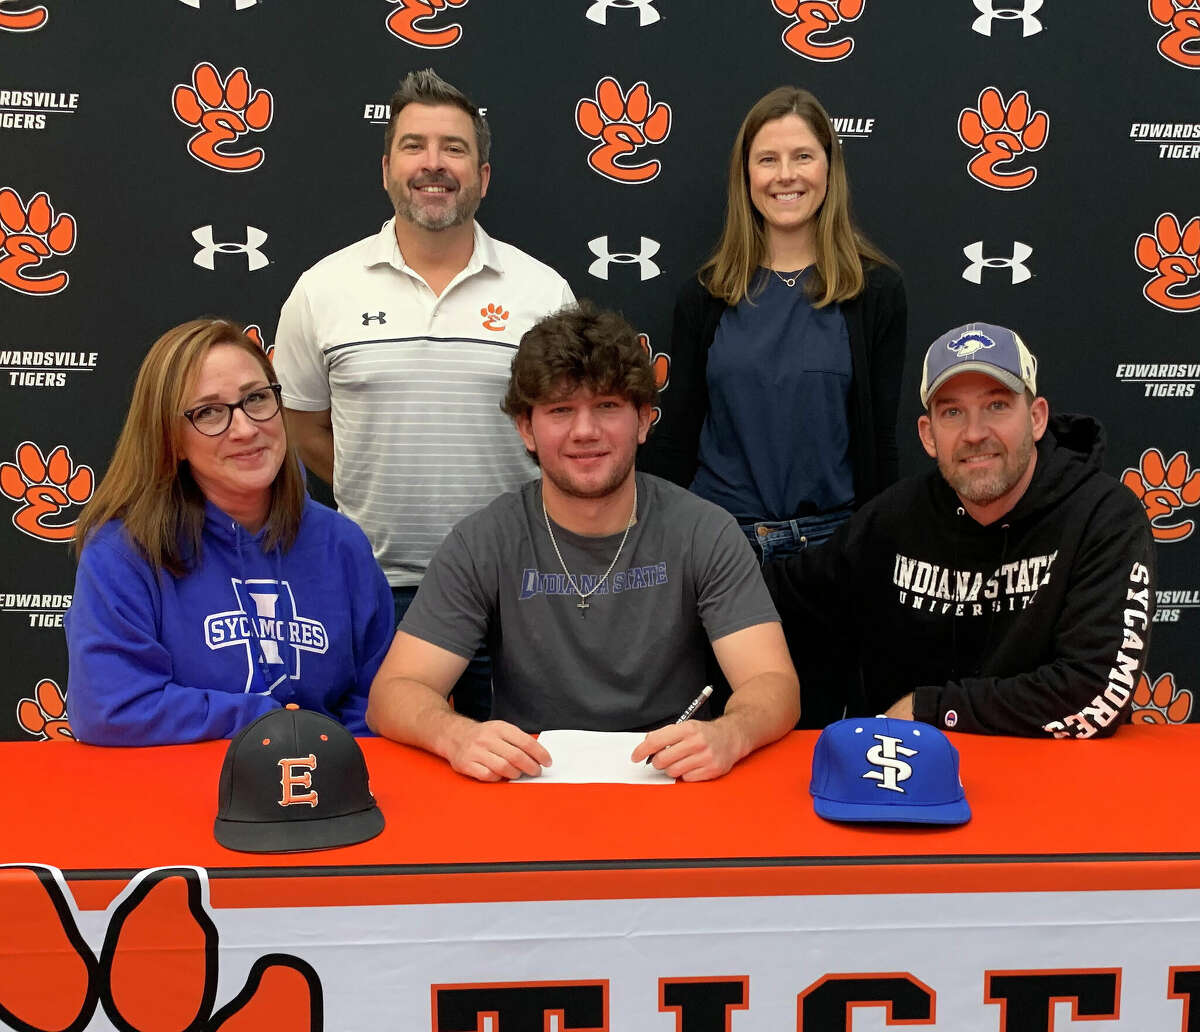 Edwardsville High School senior Riley Iffrig, seated center, will play baseball for Indiana State University.